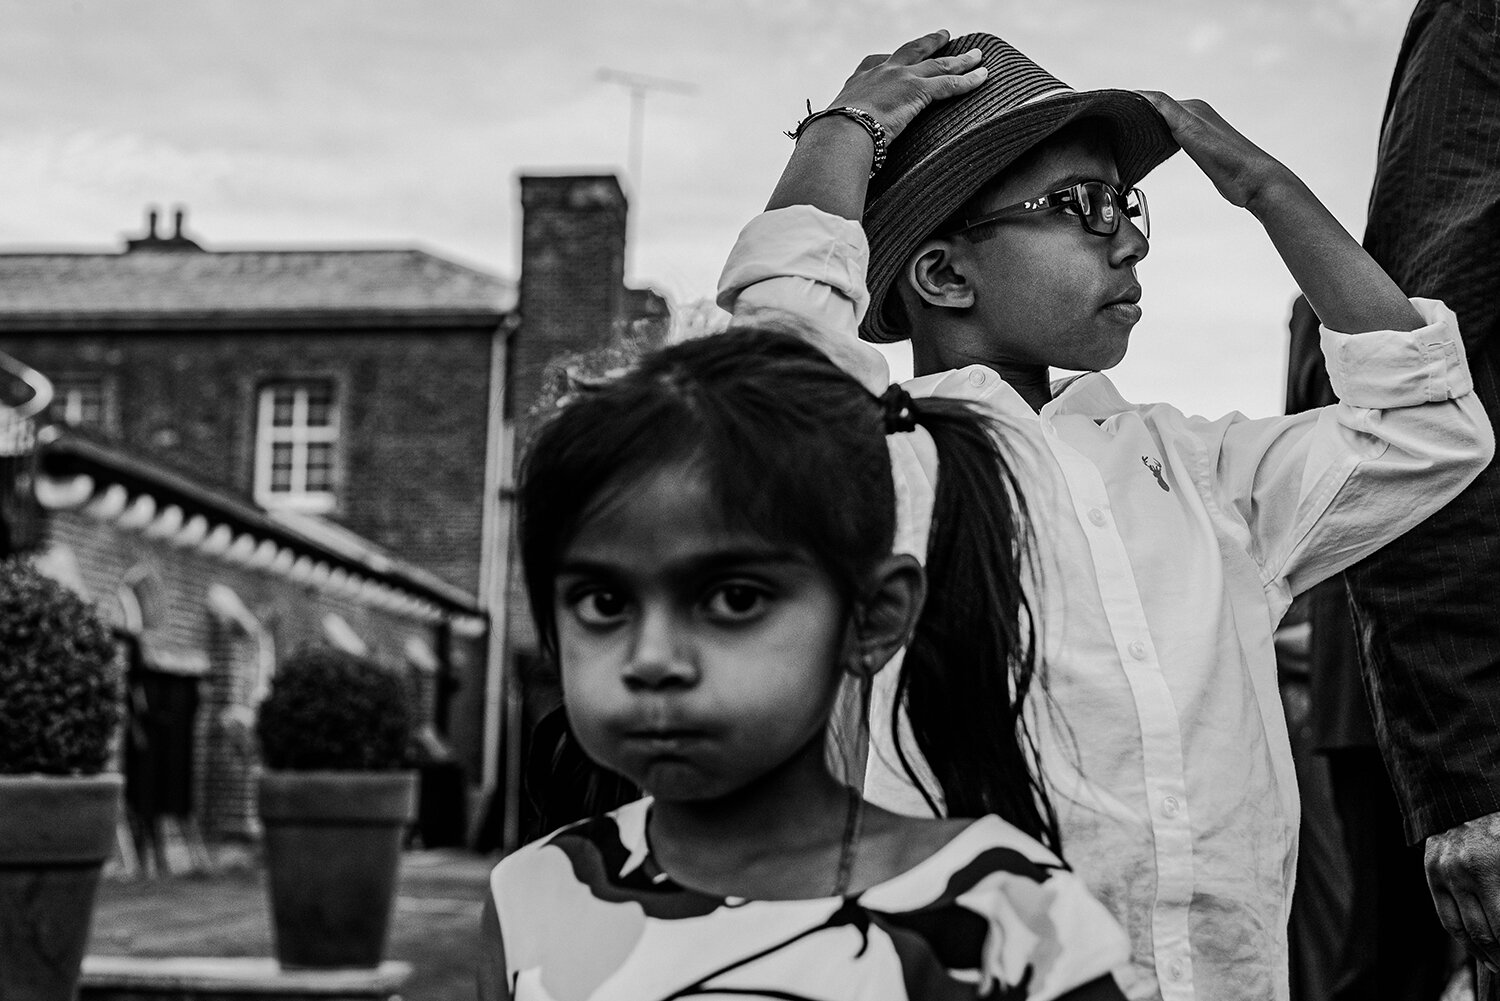  black and white photo of boy and girl looking cool 